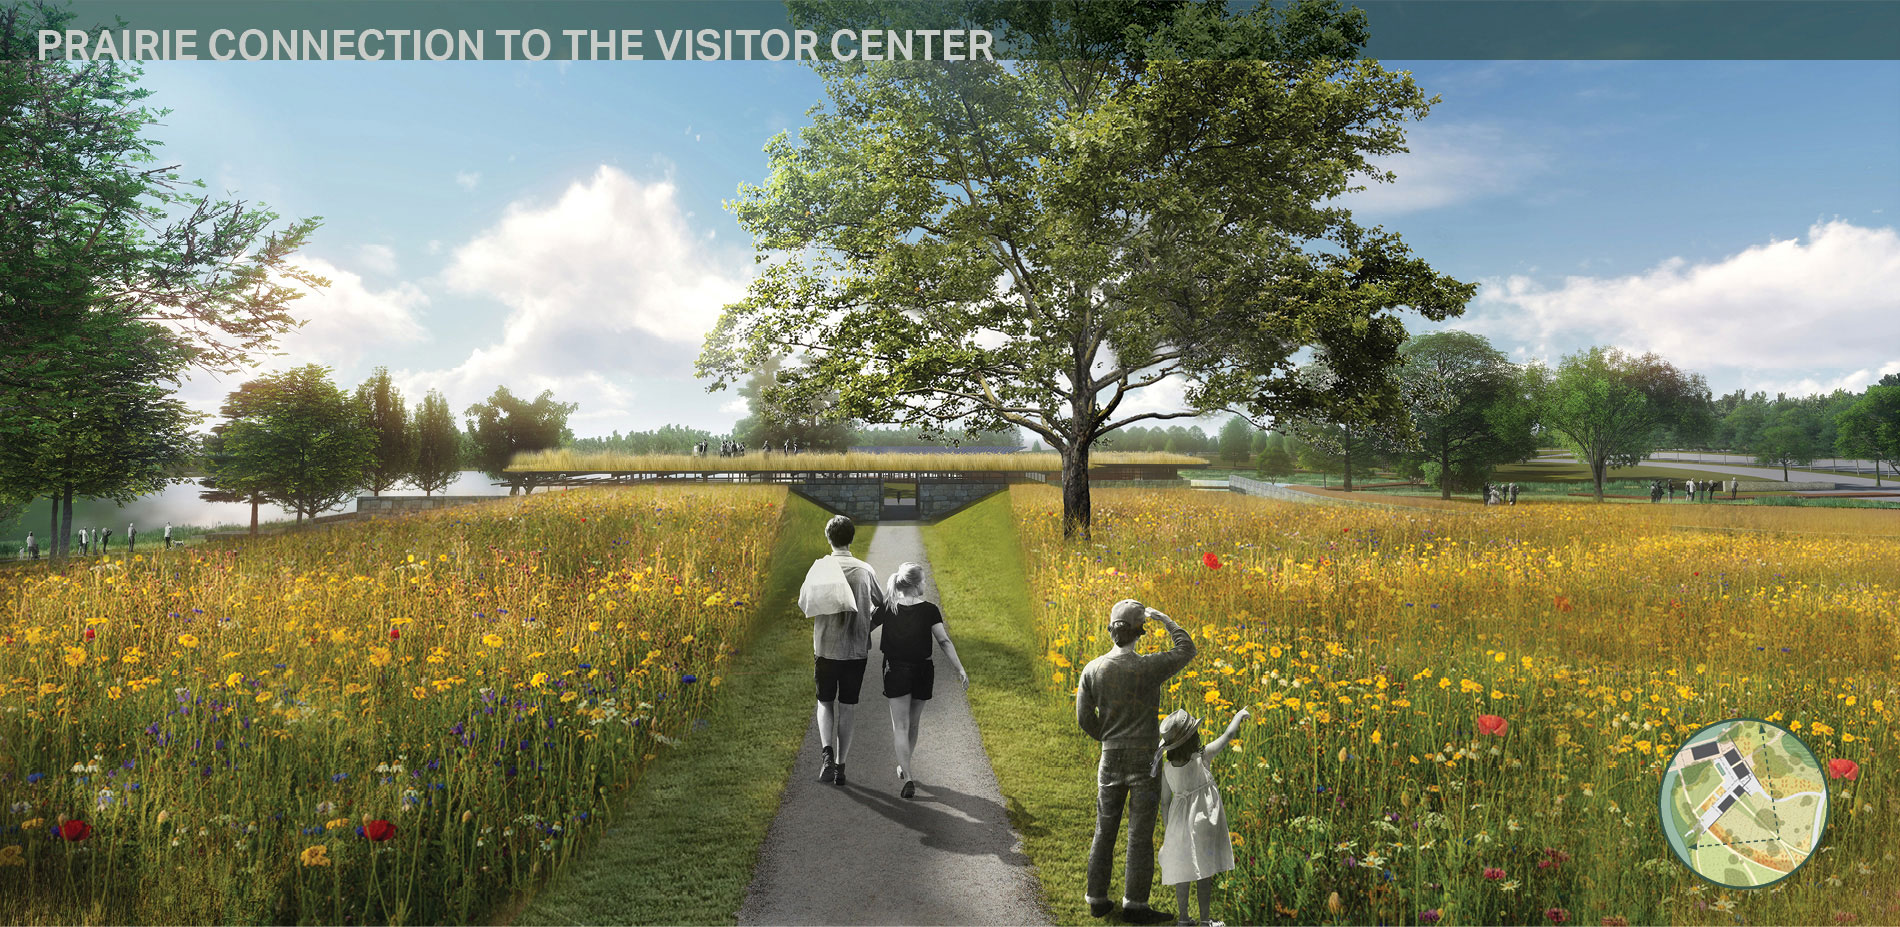 Prairie Connection to the Visitor Center